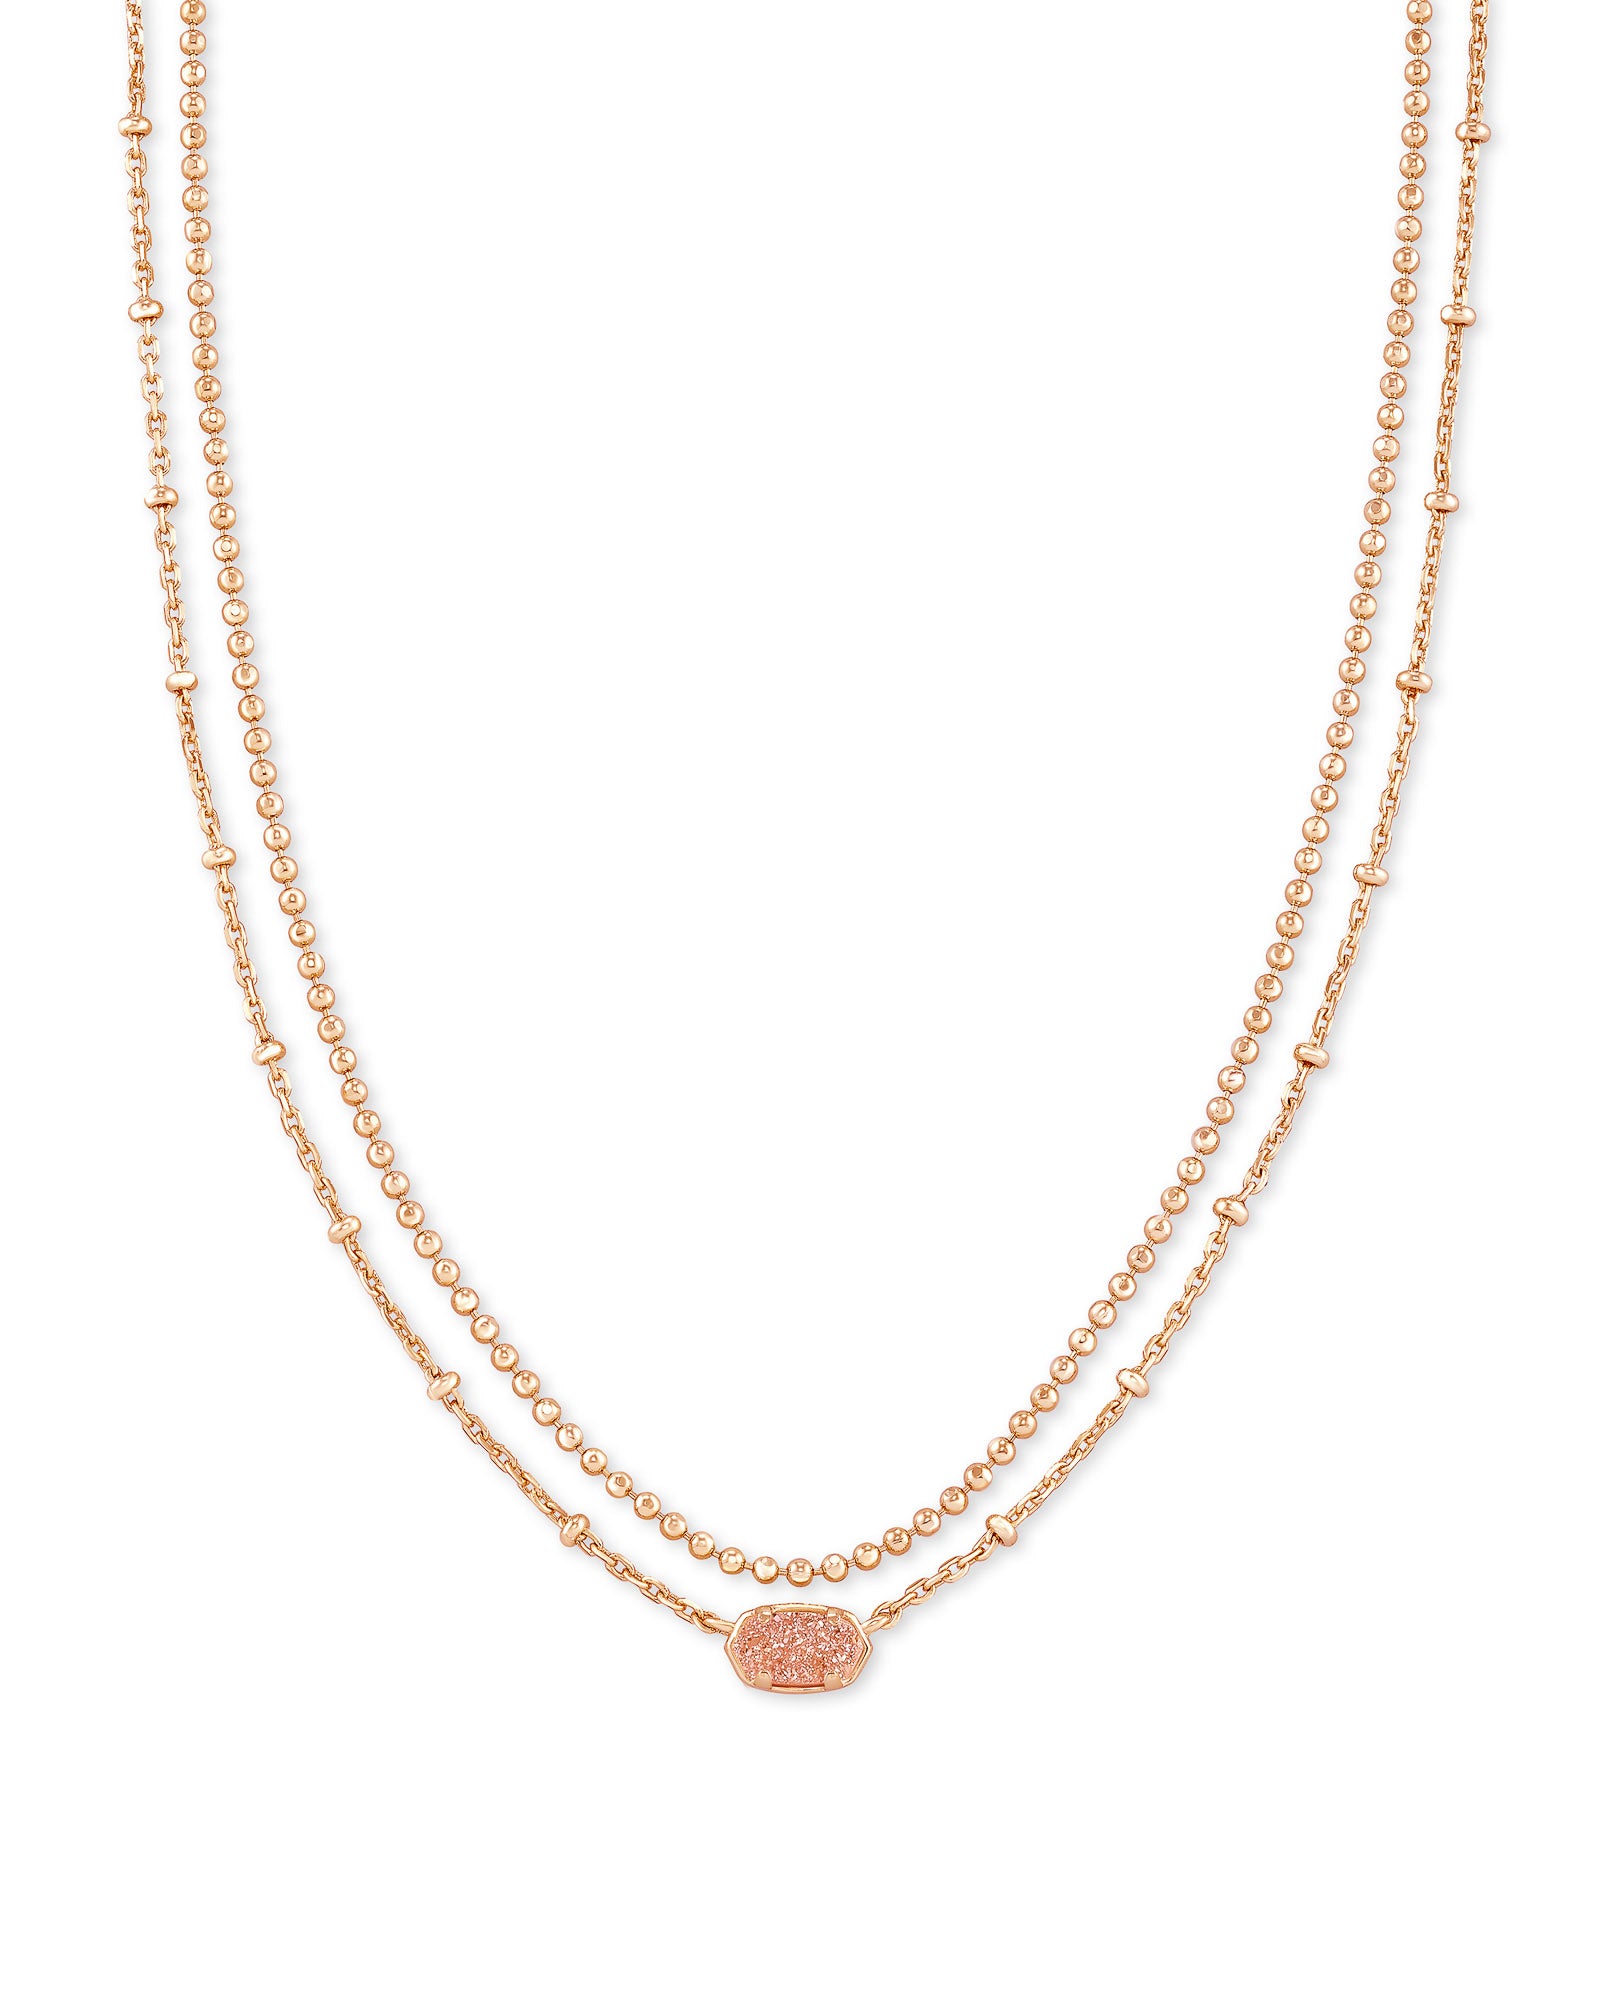 Emilie Multi Strand Necklace in Rose Gold Sand Drusy